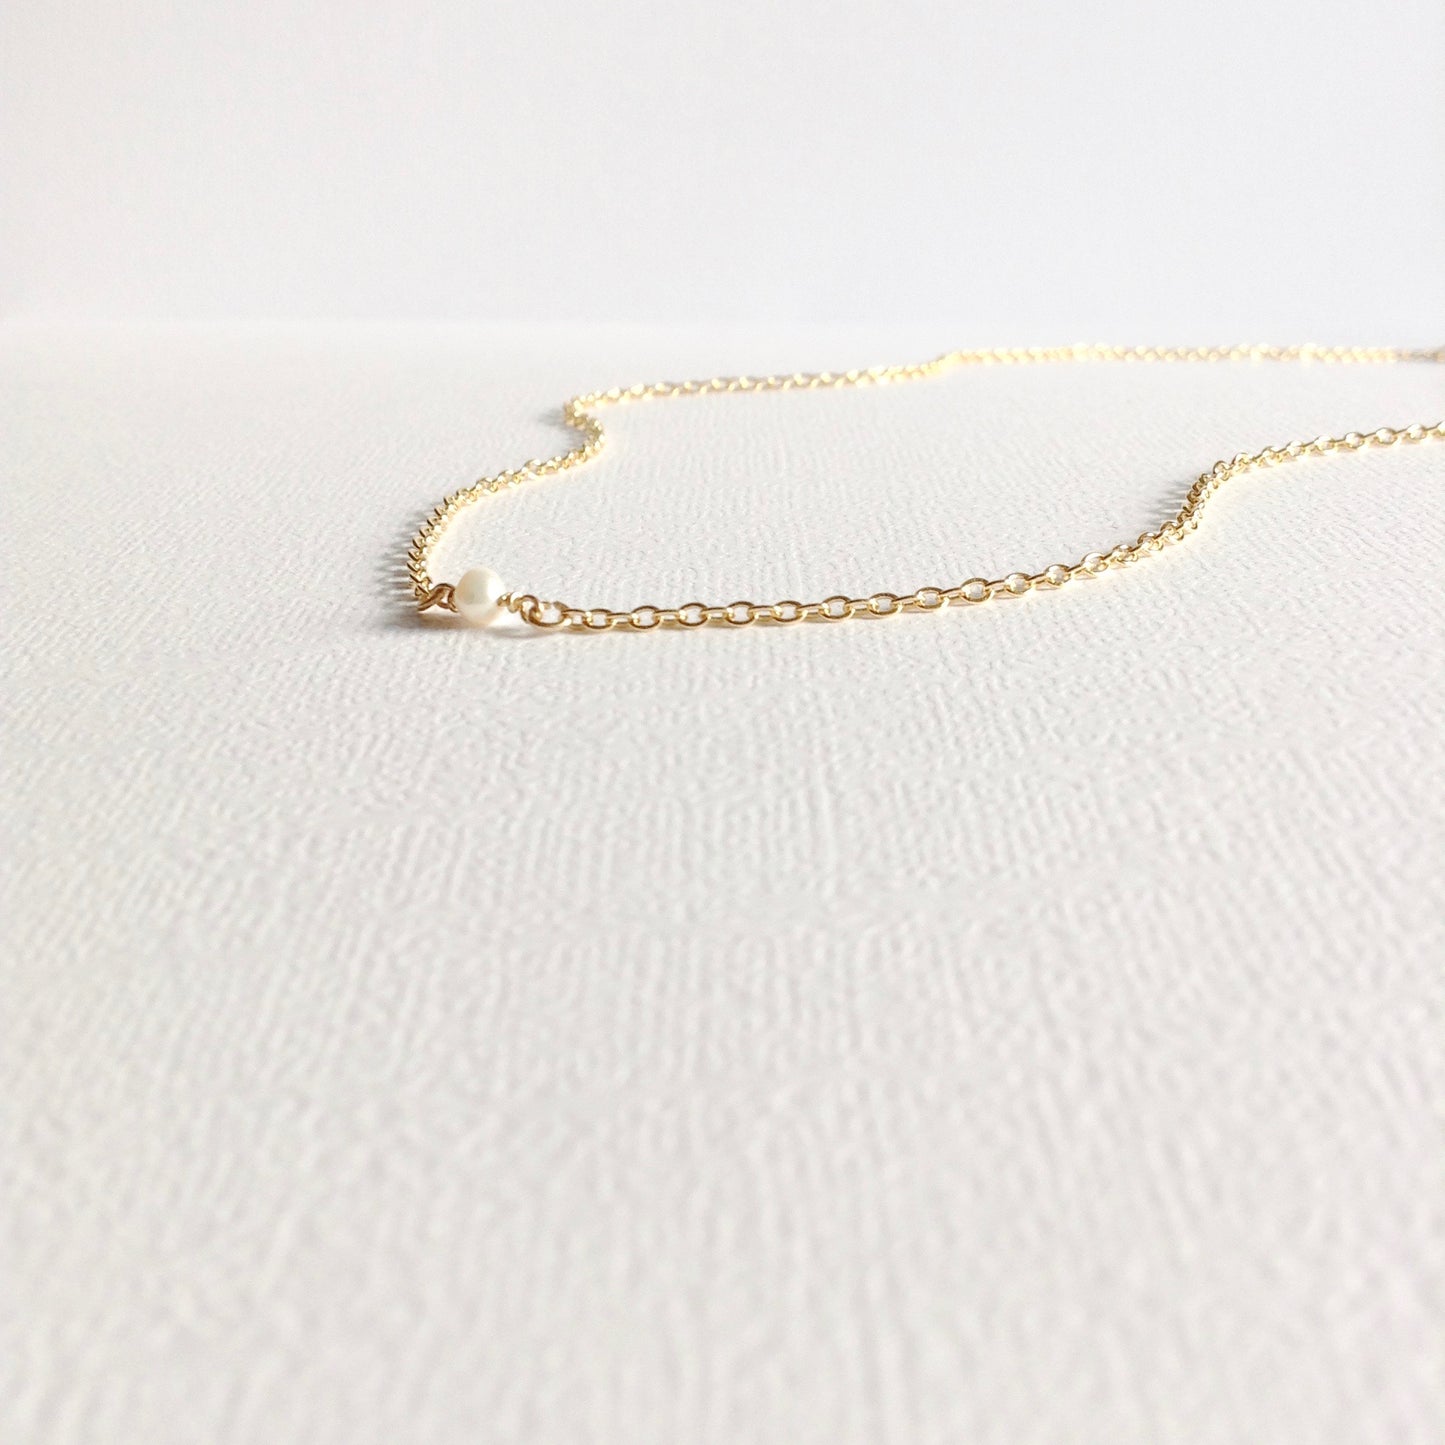 Godmother Gift Tiny Single Pearl Necklace | Meaningful Necklace | IB Jewelry